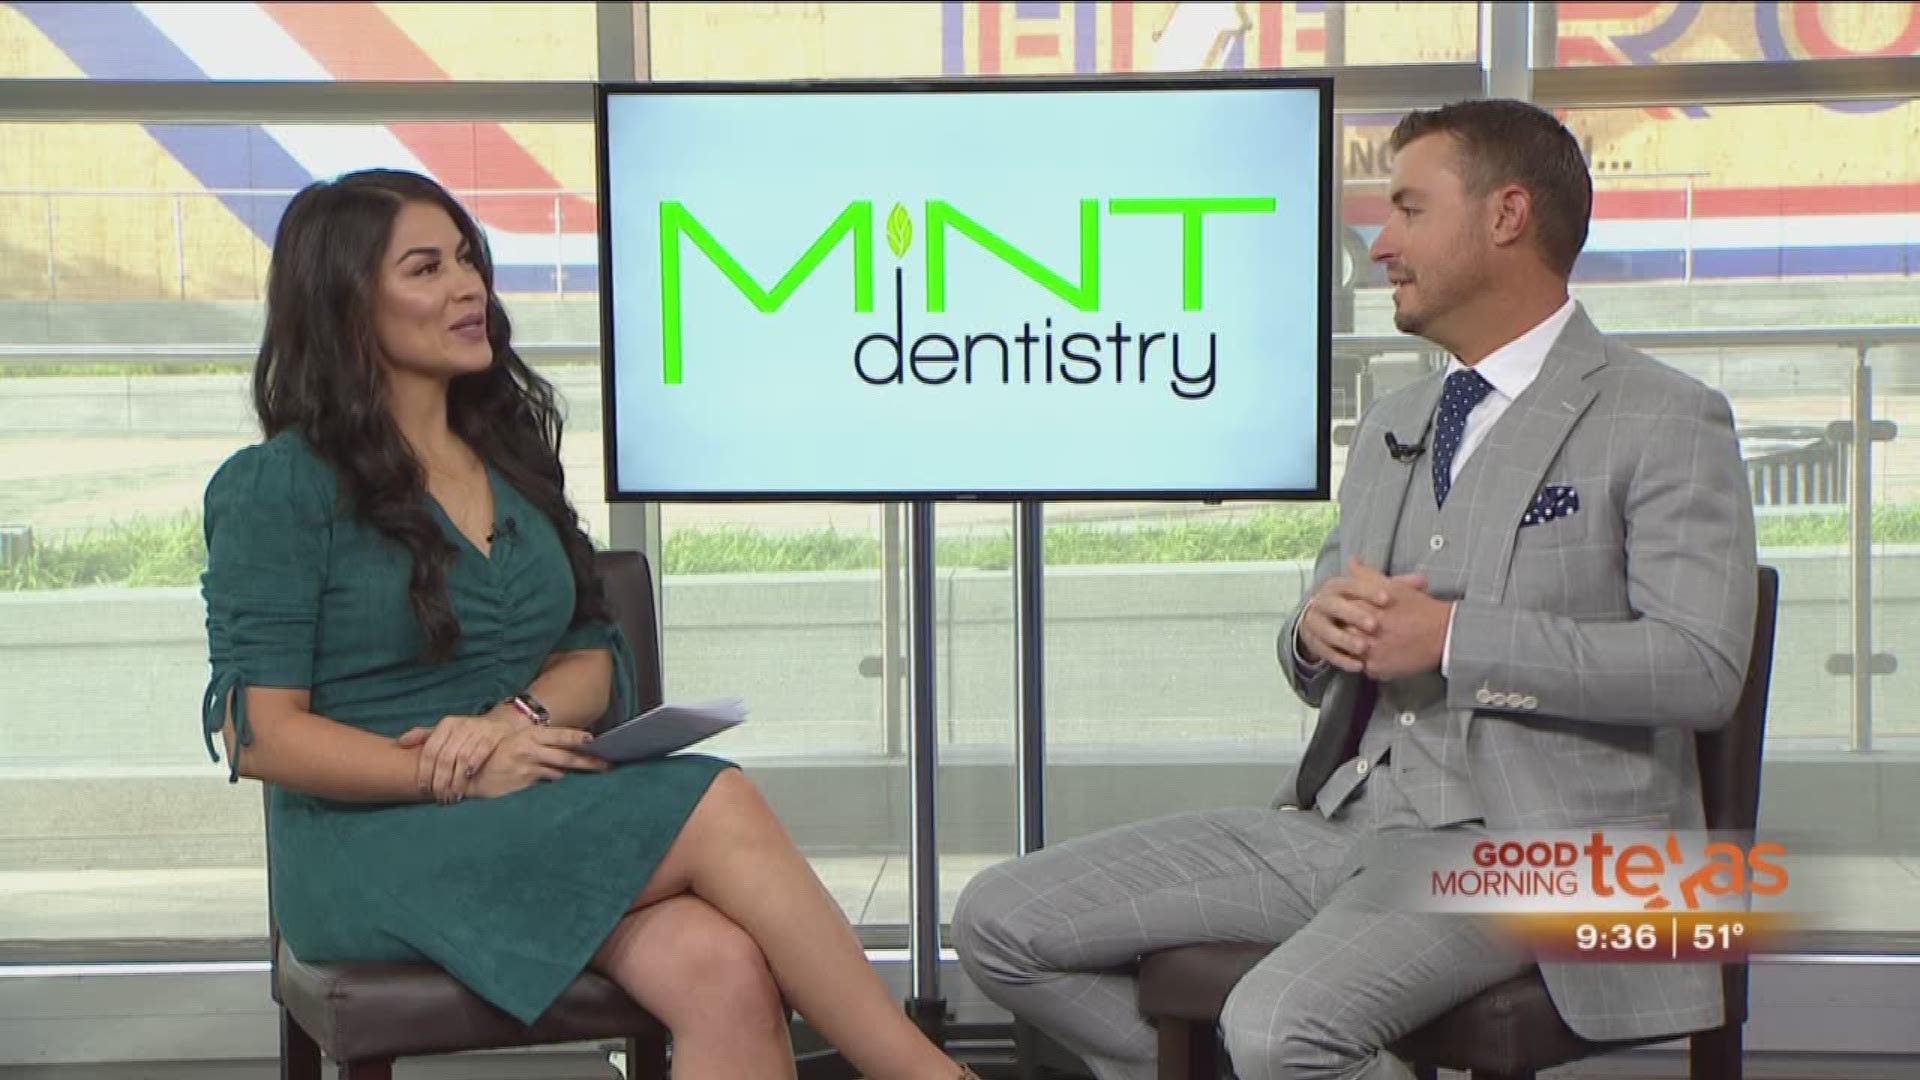 Go to mintdentistry.com for more information